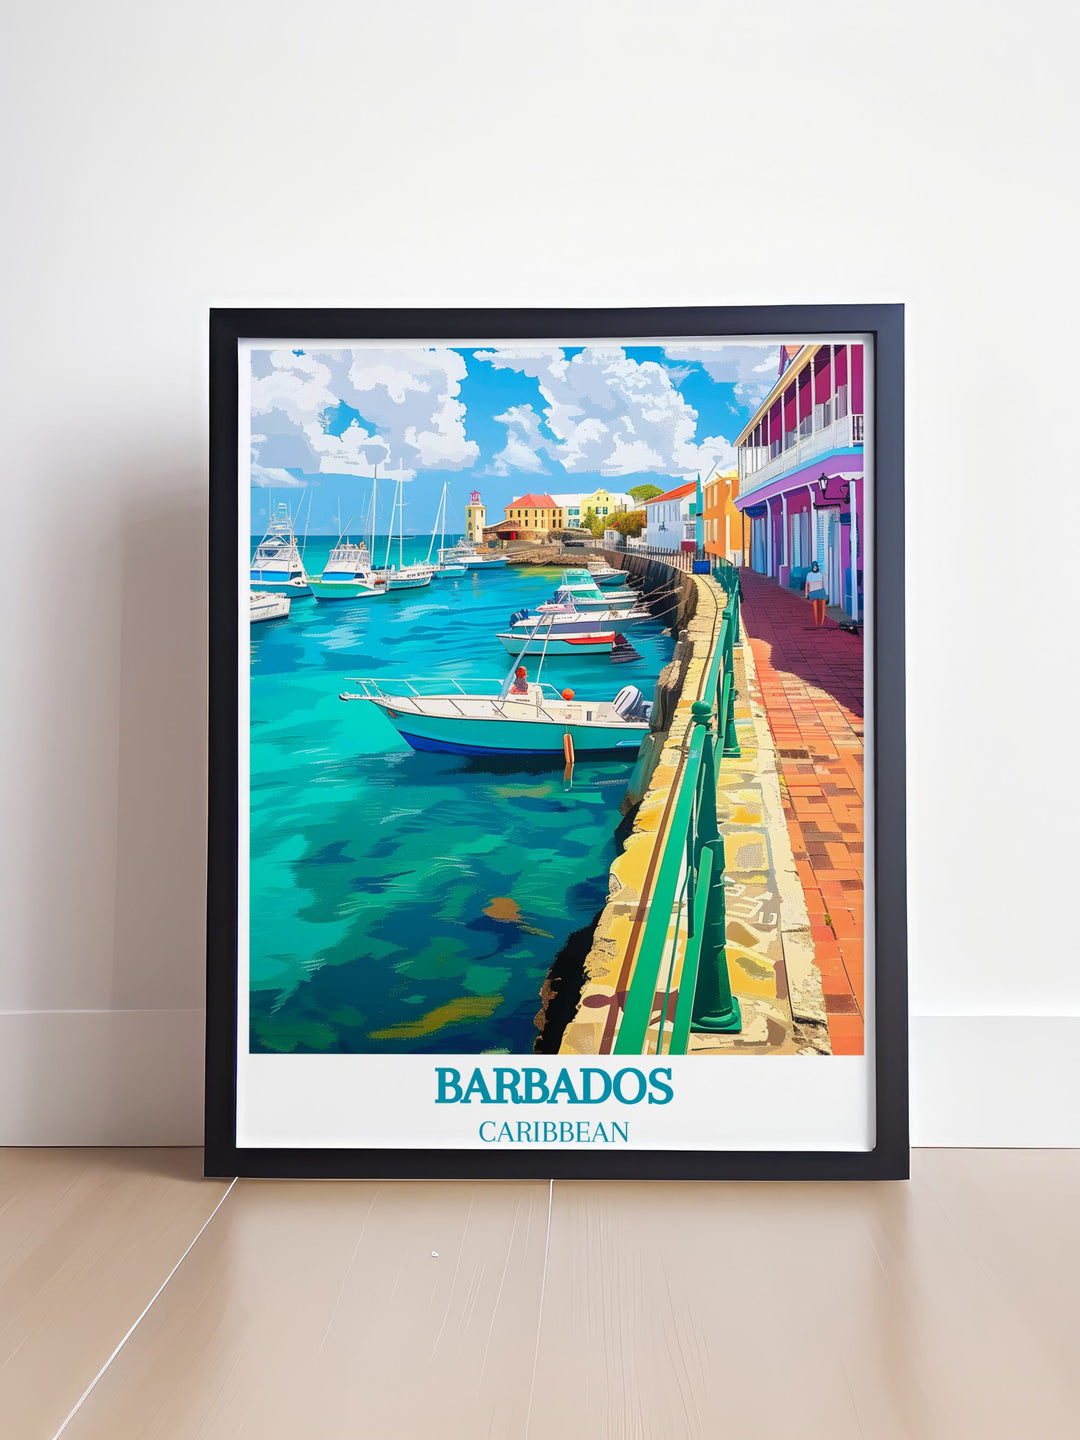 Bridgetown Barbados Framed Art showcasing the unique blend of colonial architecture and modern vibrancy, making it an ideal addition to any space seeking a touch of historical elegance and Caribbean beauty.